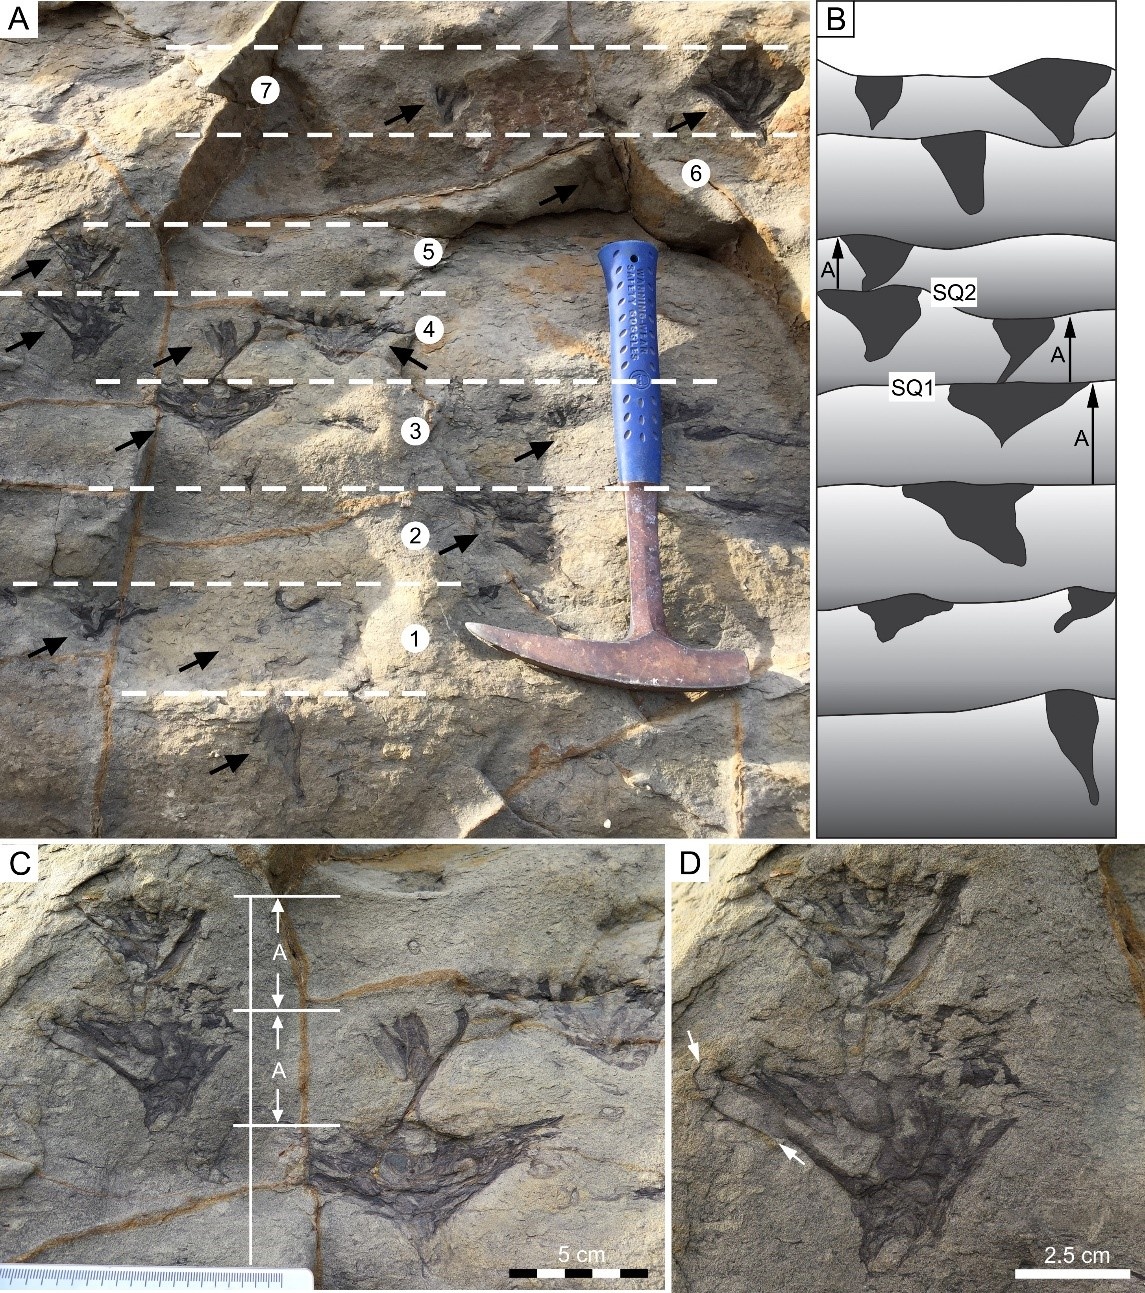 Trace fossils deciphering the ecology of ancient marine animals and sedimentation rate during the deep time ice age during the Permian